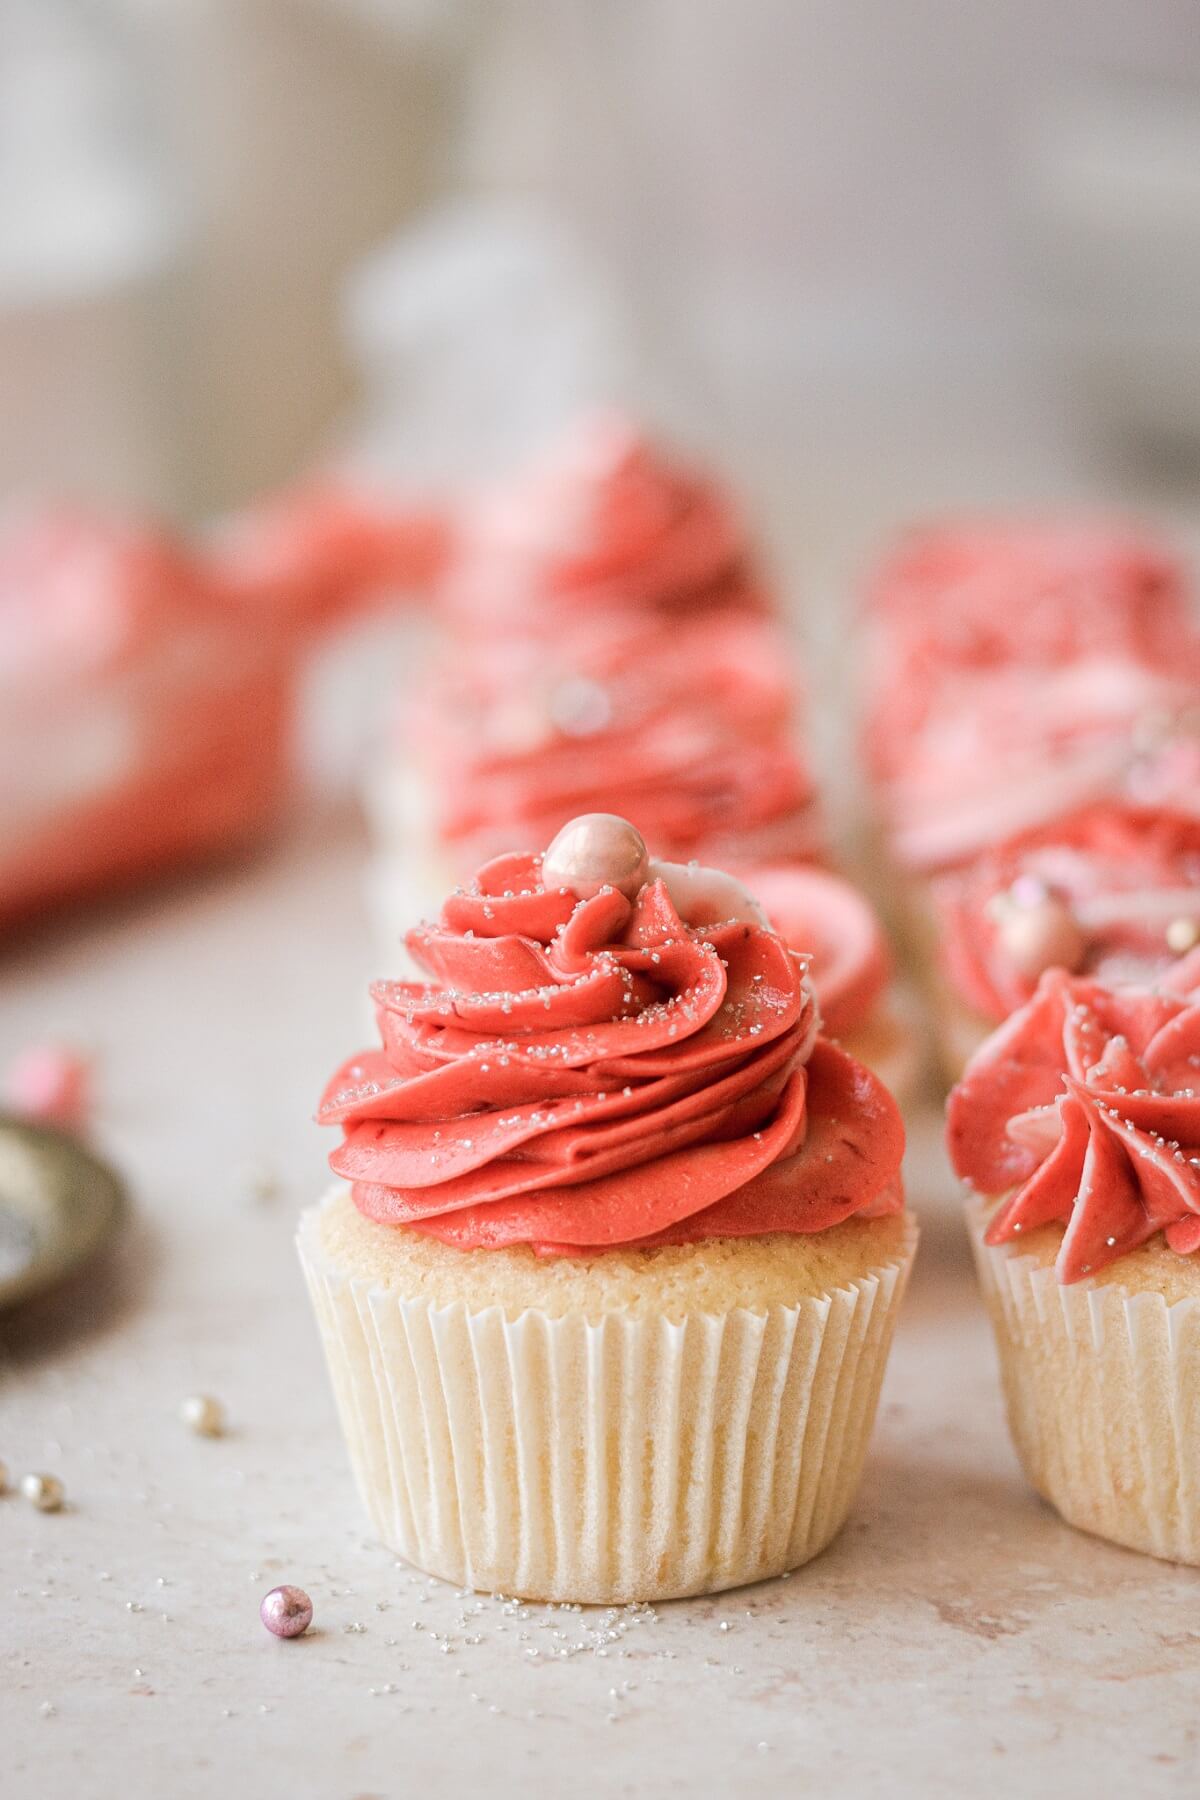 A cupcake with a classic swirl of pink frosting.